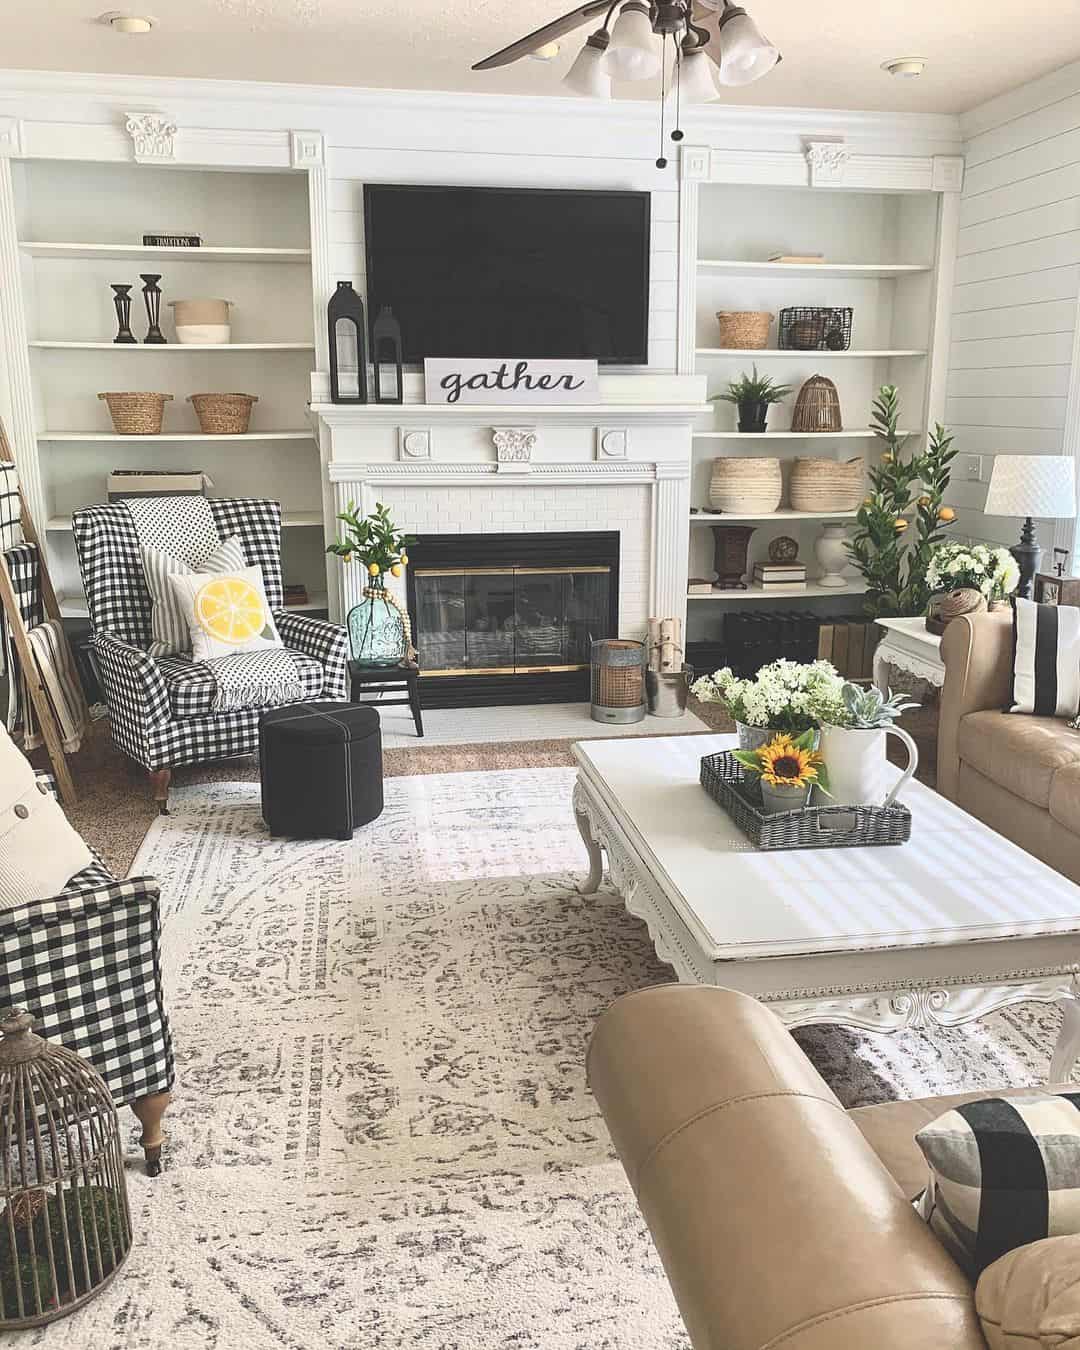 Black and White Checked Chairs With Shiplap Walls - Soul & Lane